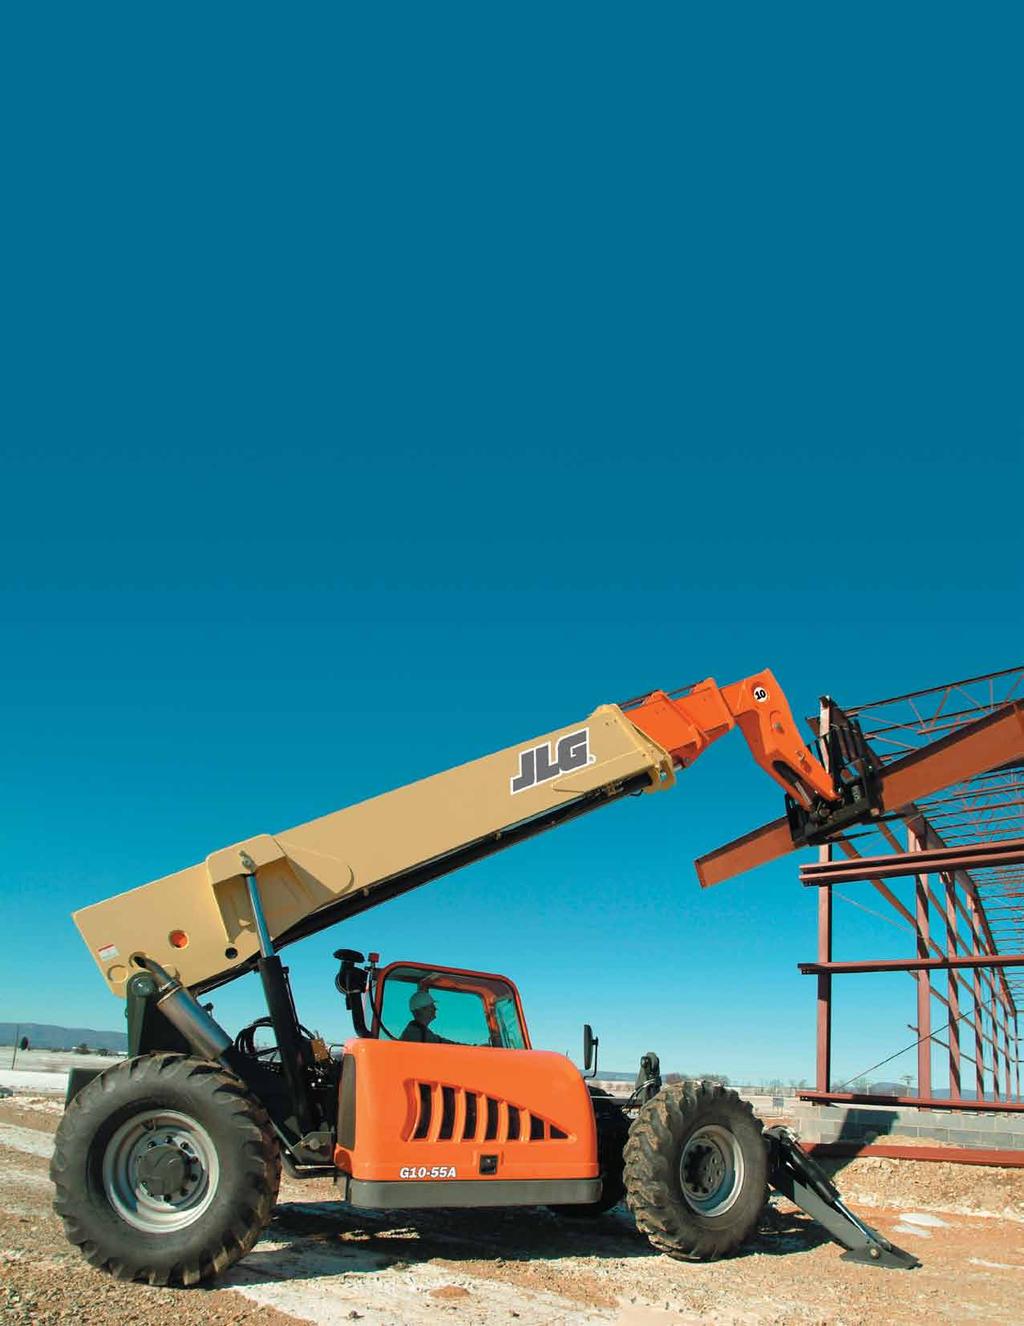 P o w e r T r a i n a n d c a p a c i t y Let JLG Do the Heavy Lifting. A dominant presence on the job site, these telehandlers live up to their tough reputation.